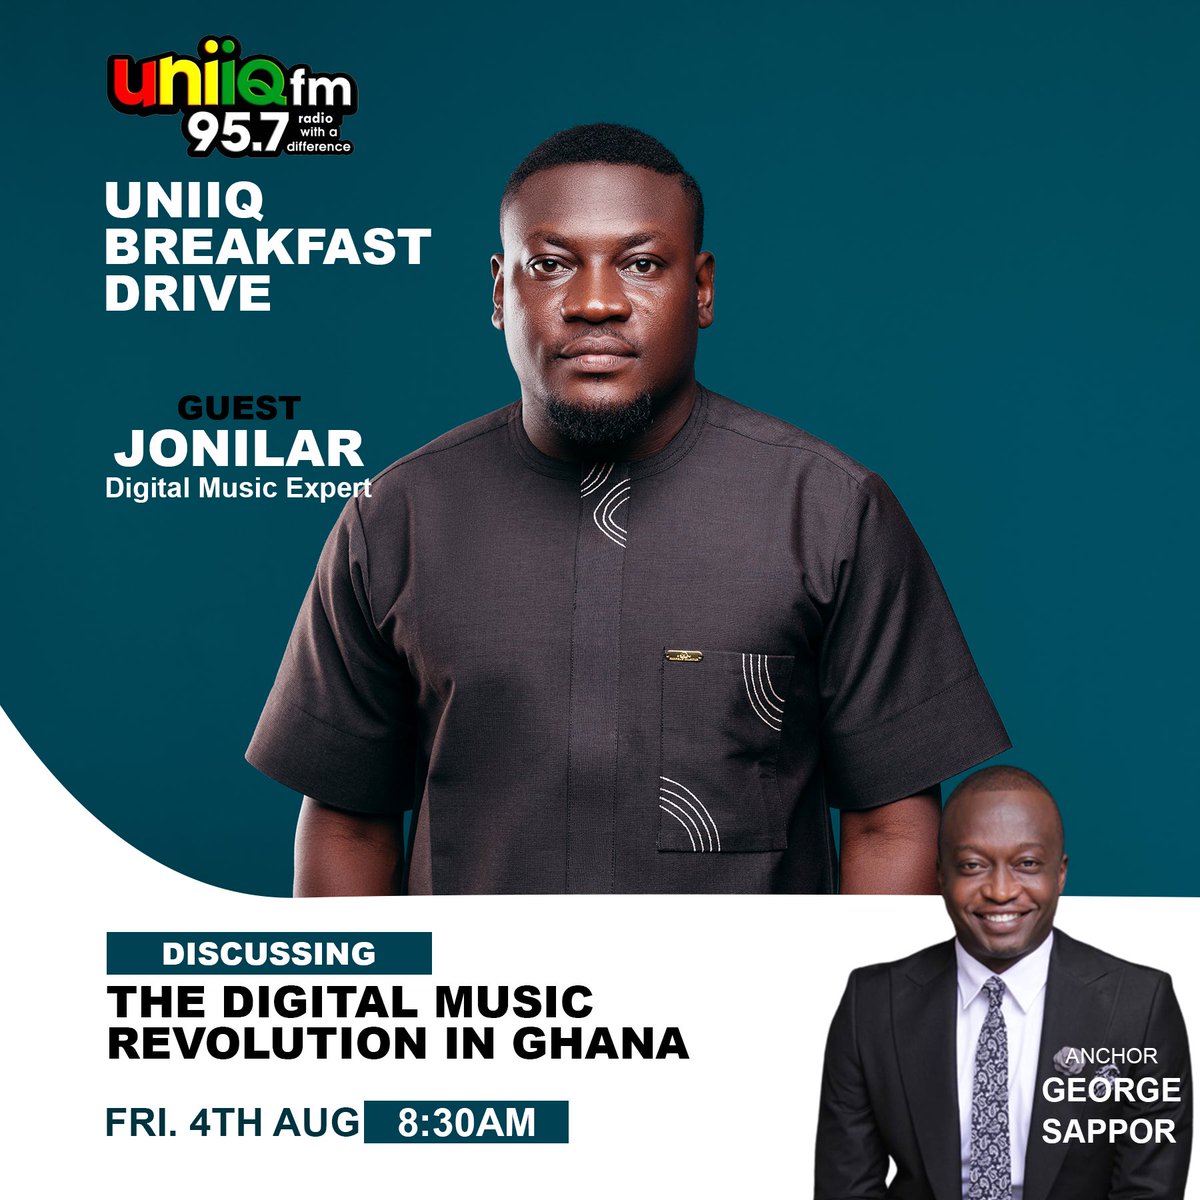 Coming up this morning on @Uniiqfm . The Digital music conversation continues. More lessons: Instagram.com/DmeSeries 📚